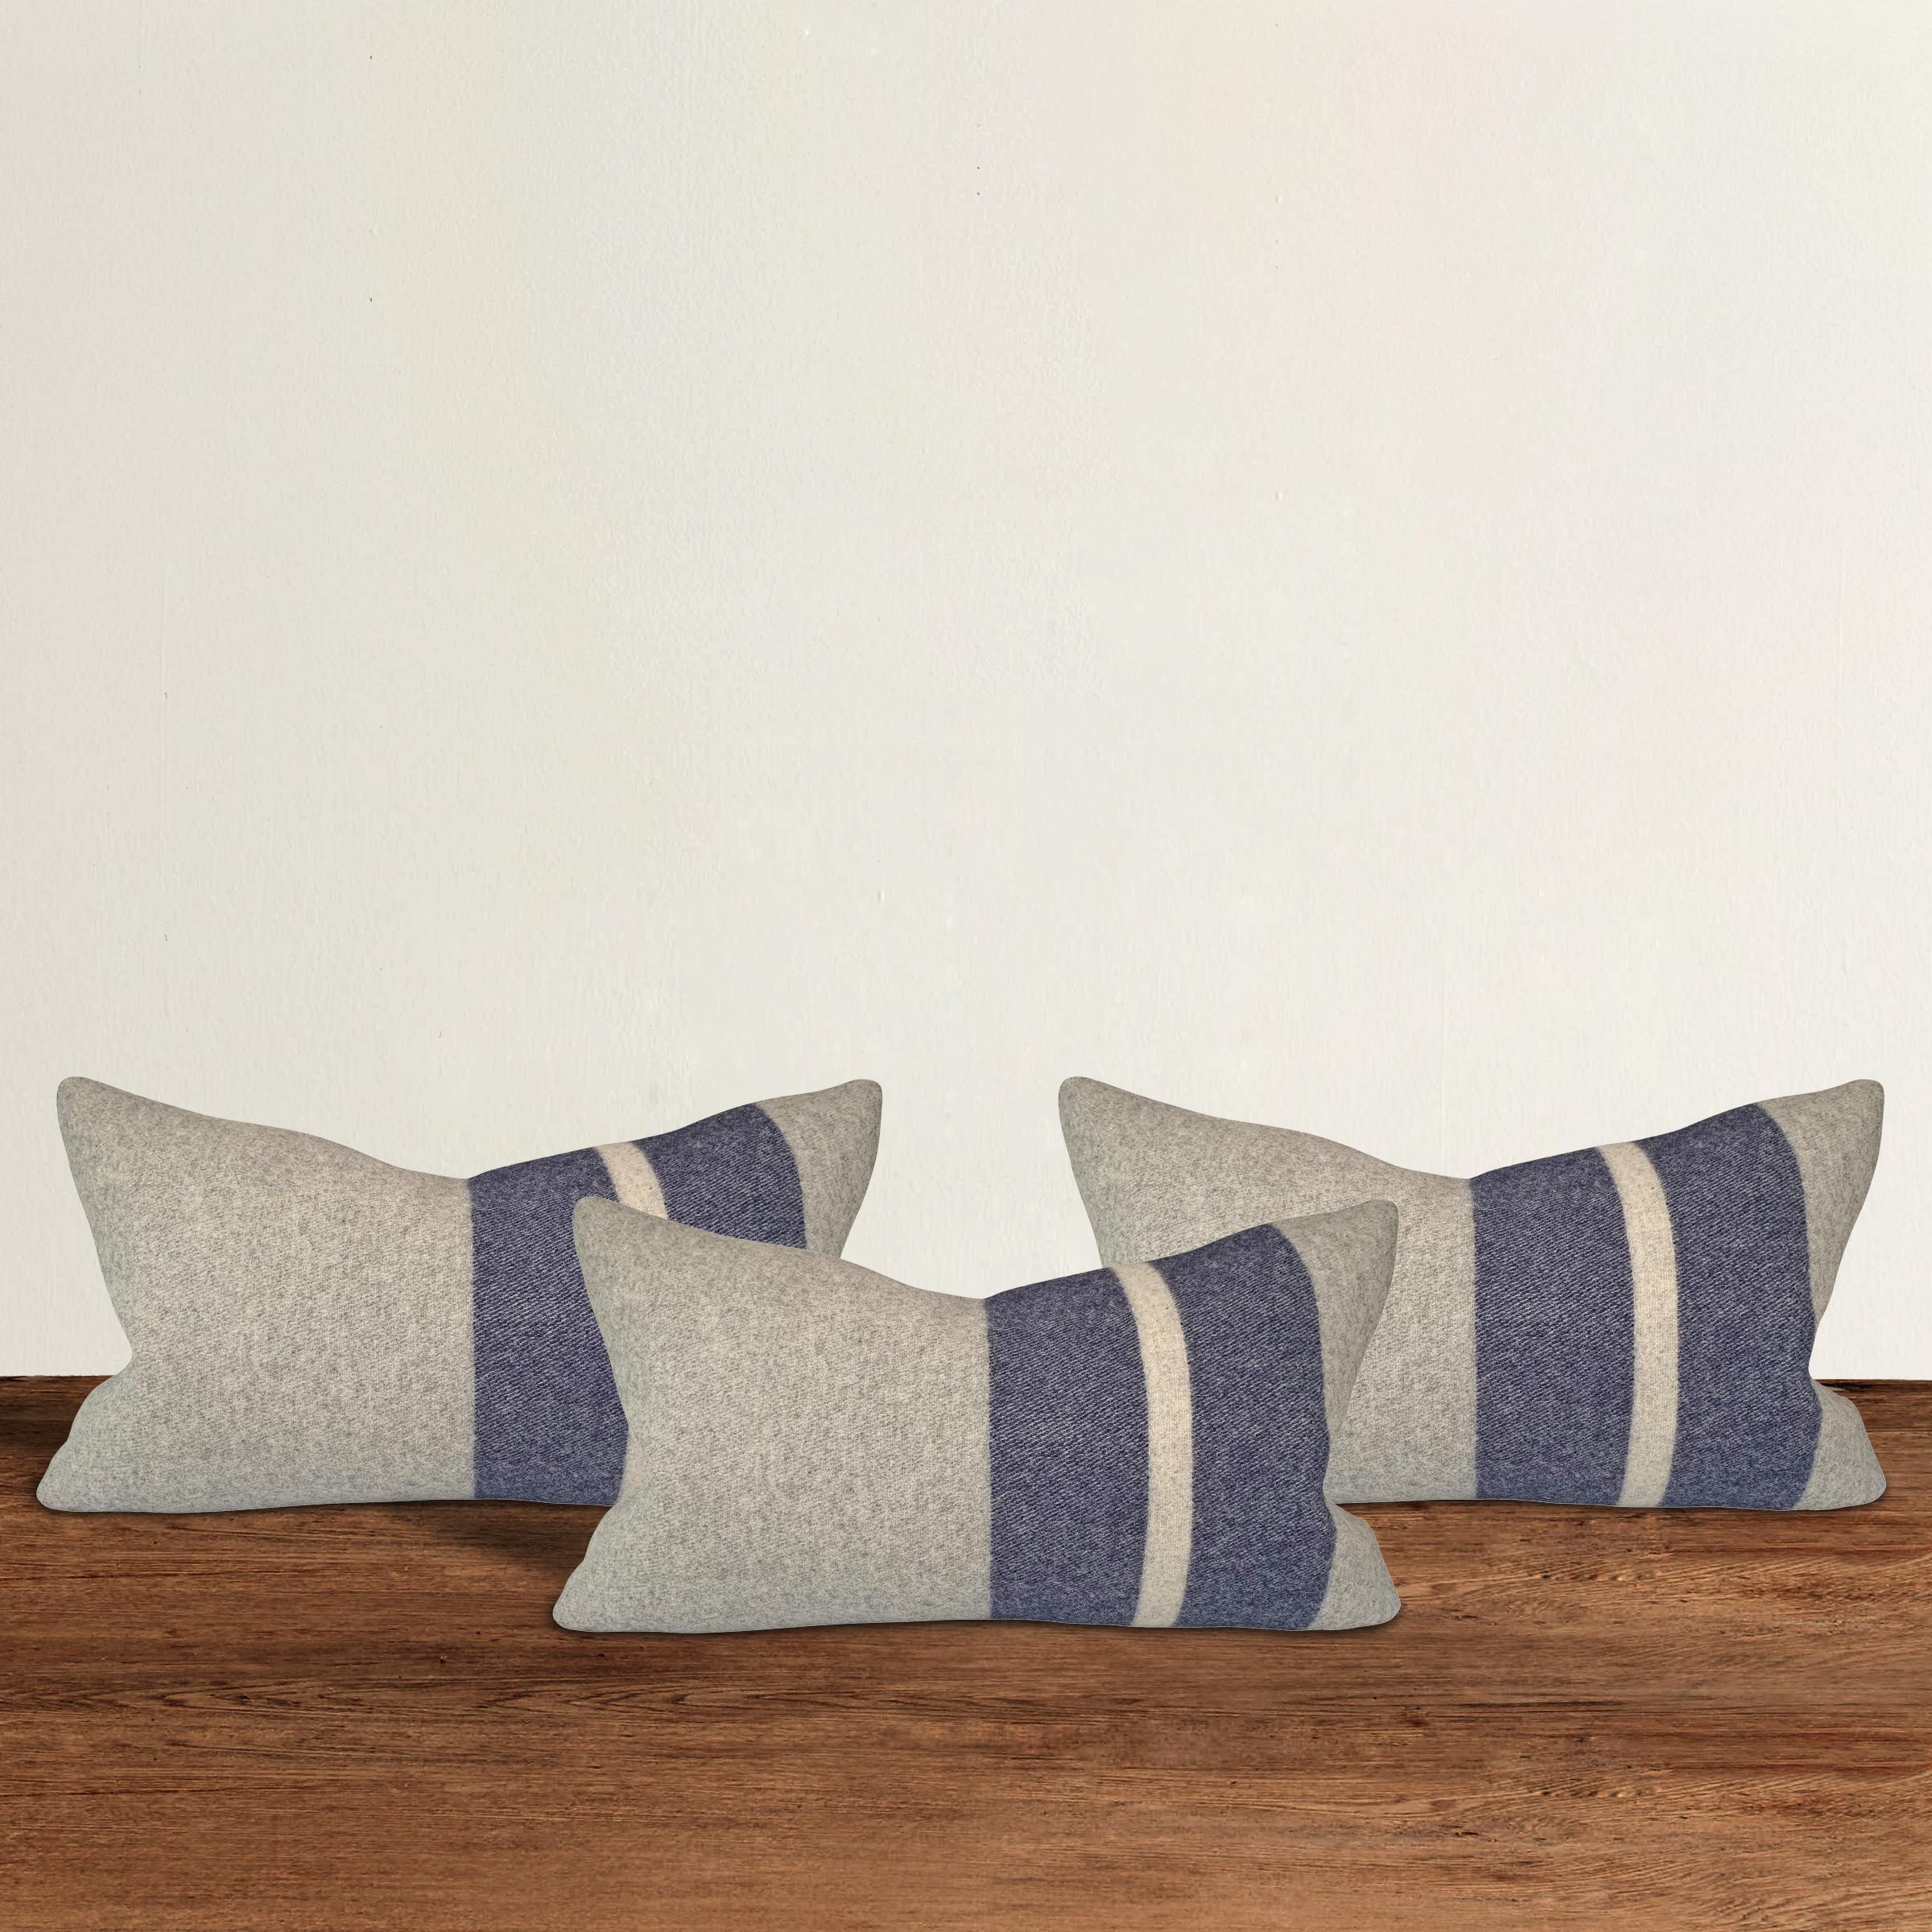 A wonderful set of three pillows with blue and white stripes, custom made from wool sourced from the Faribault Woolen Mills in Faribault, Minnesota. Faribault Woolen Mill was founded in 1865 along the Cannon River in Southeastern Minnesota, and